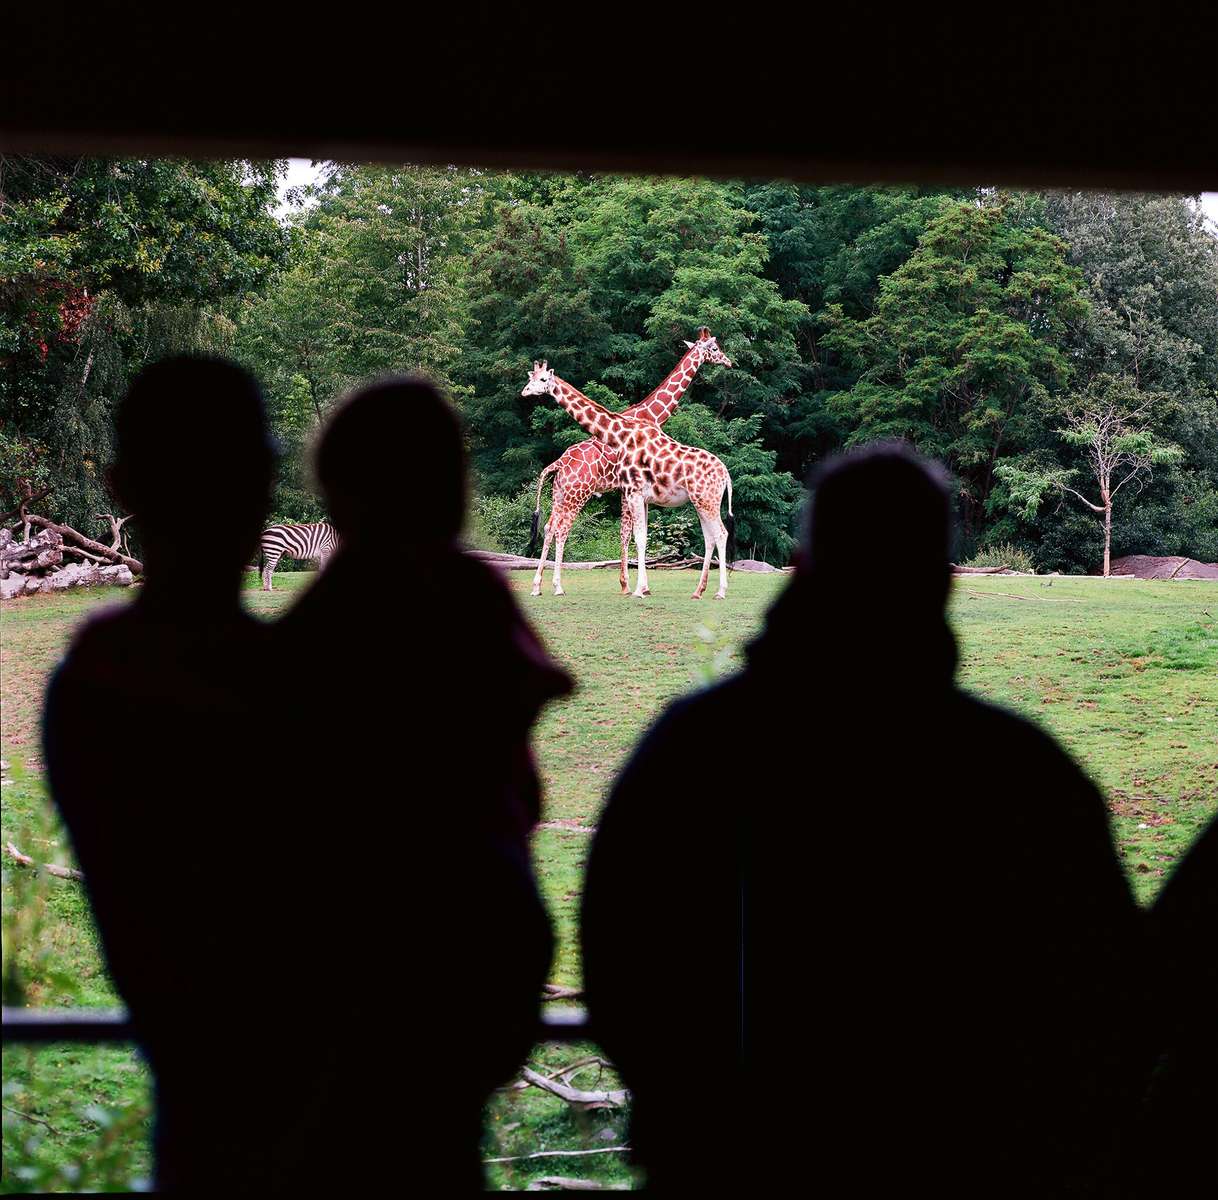 People look at giraffes in the African Savanah exhibit at the Woodland Park Zoo in Seattle, Wash. Giraffes live in loosely bound, scattered herds of 10-20 (up to 100).